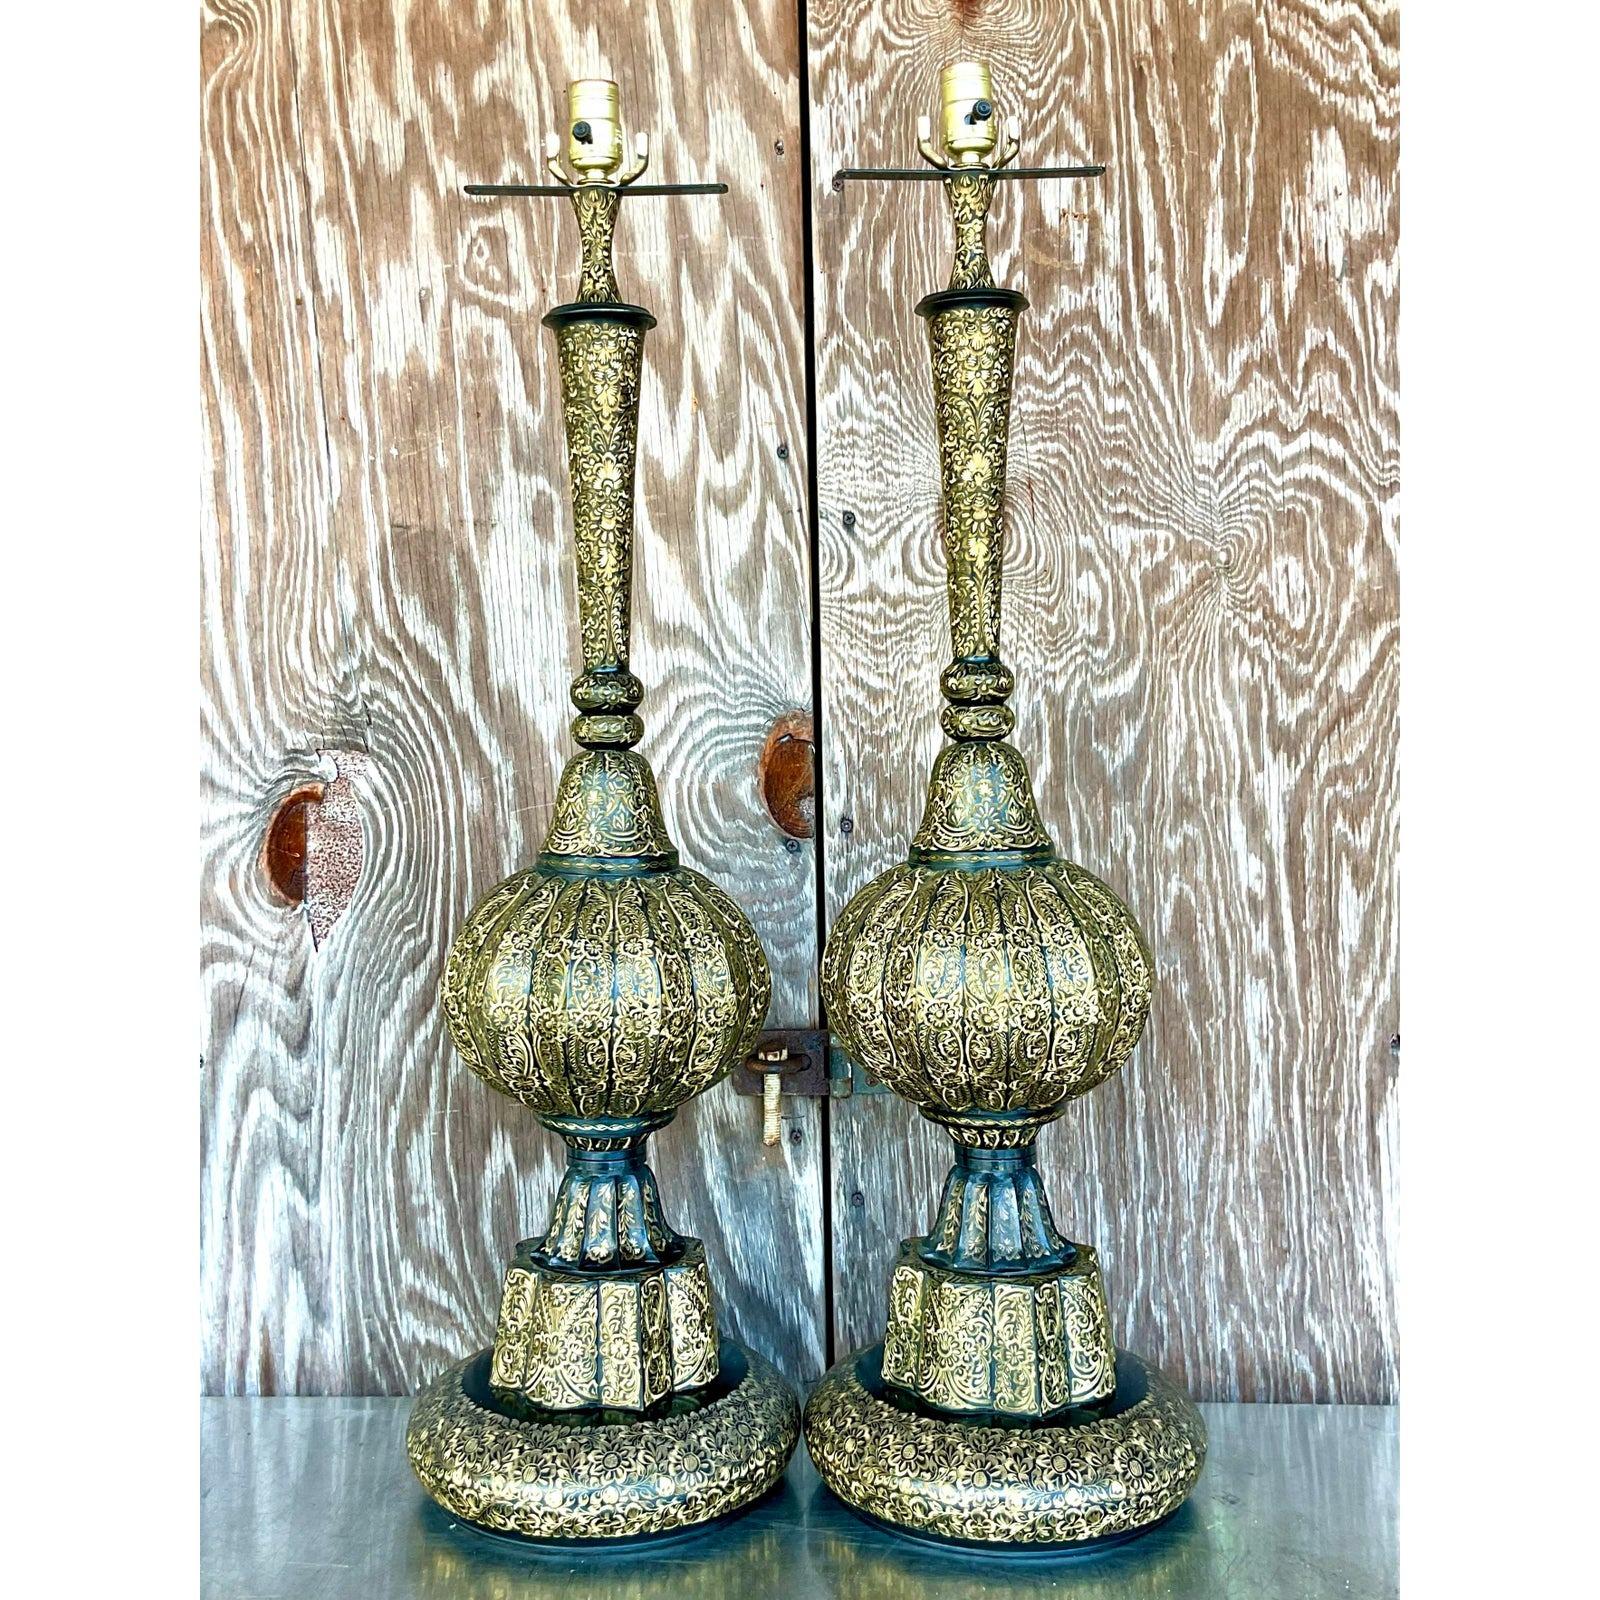 Vintage Boho Moroccan Etched Enamel and Brass Lamps - a Pair For Sale 1